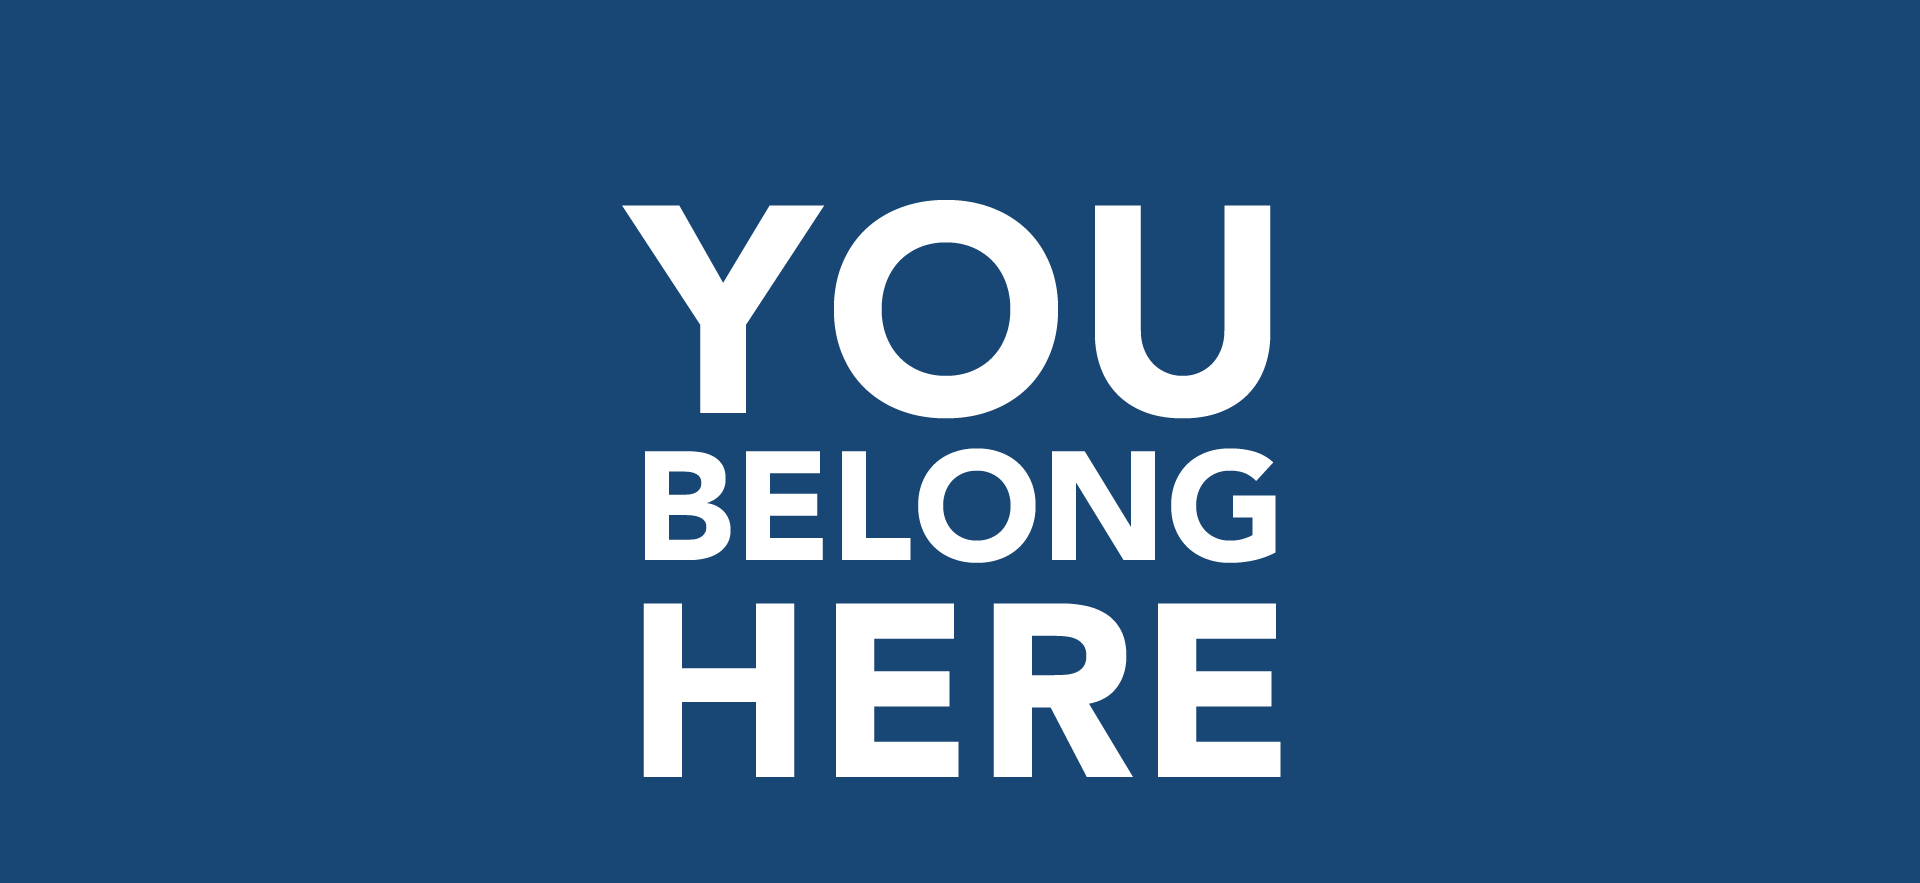 blue graphic that says You Belong Here that slides to the right side as you scroll